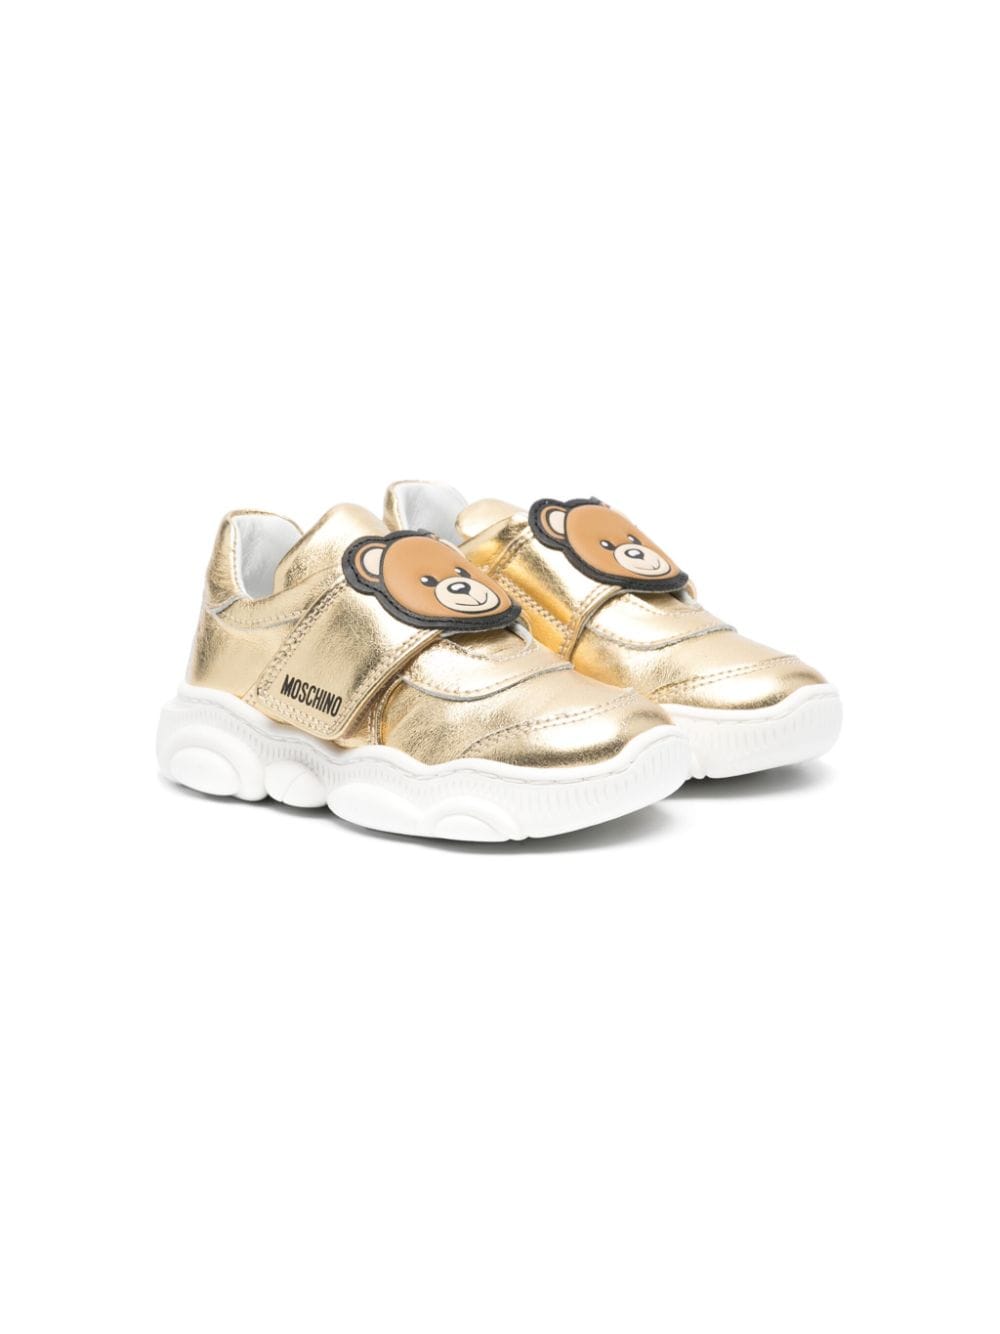 Moschino Kids' Teddy Bear Leather Trainers In Gold